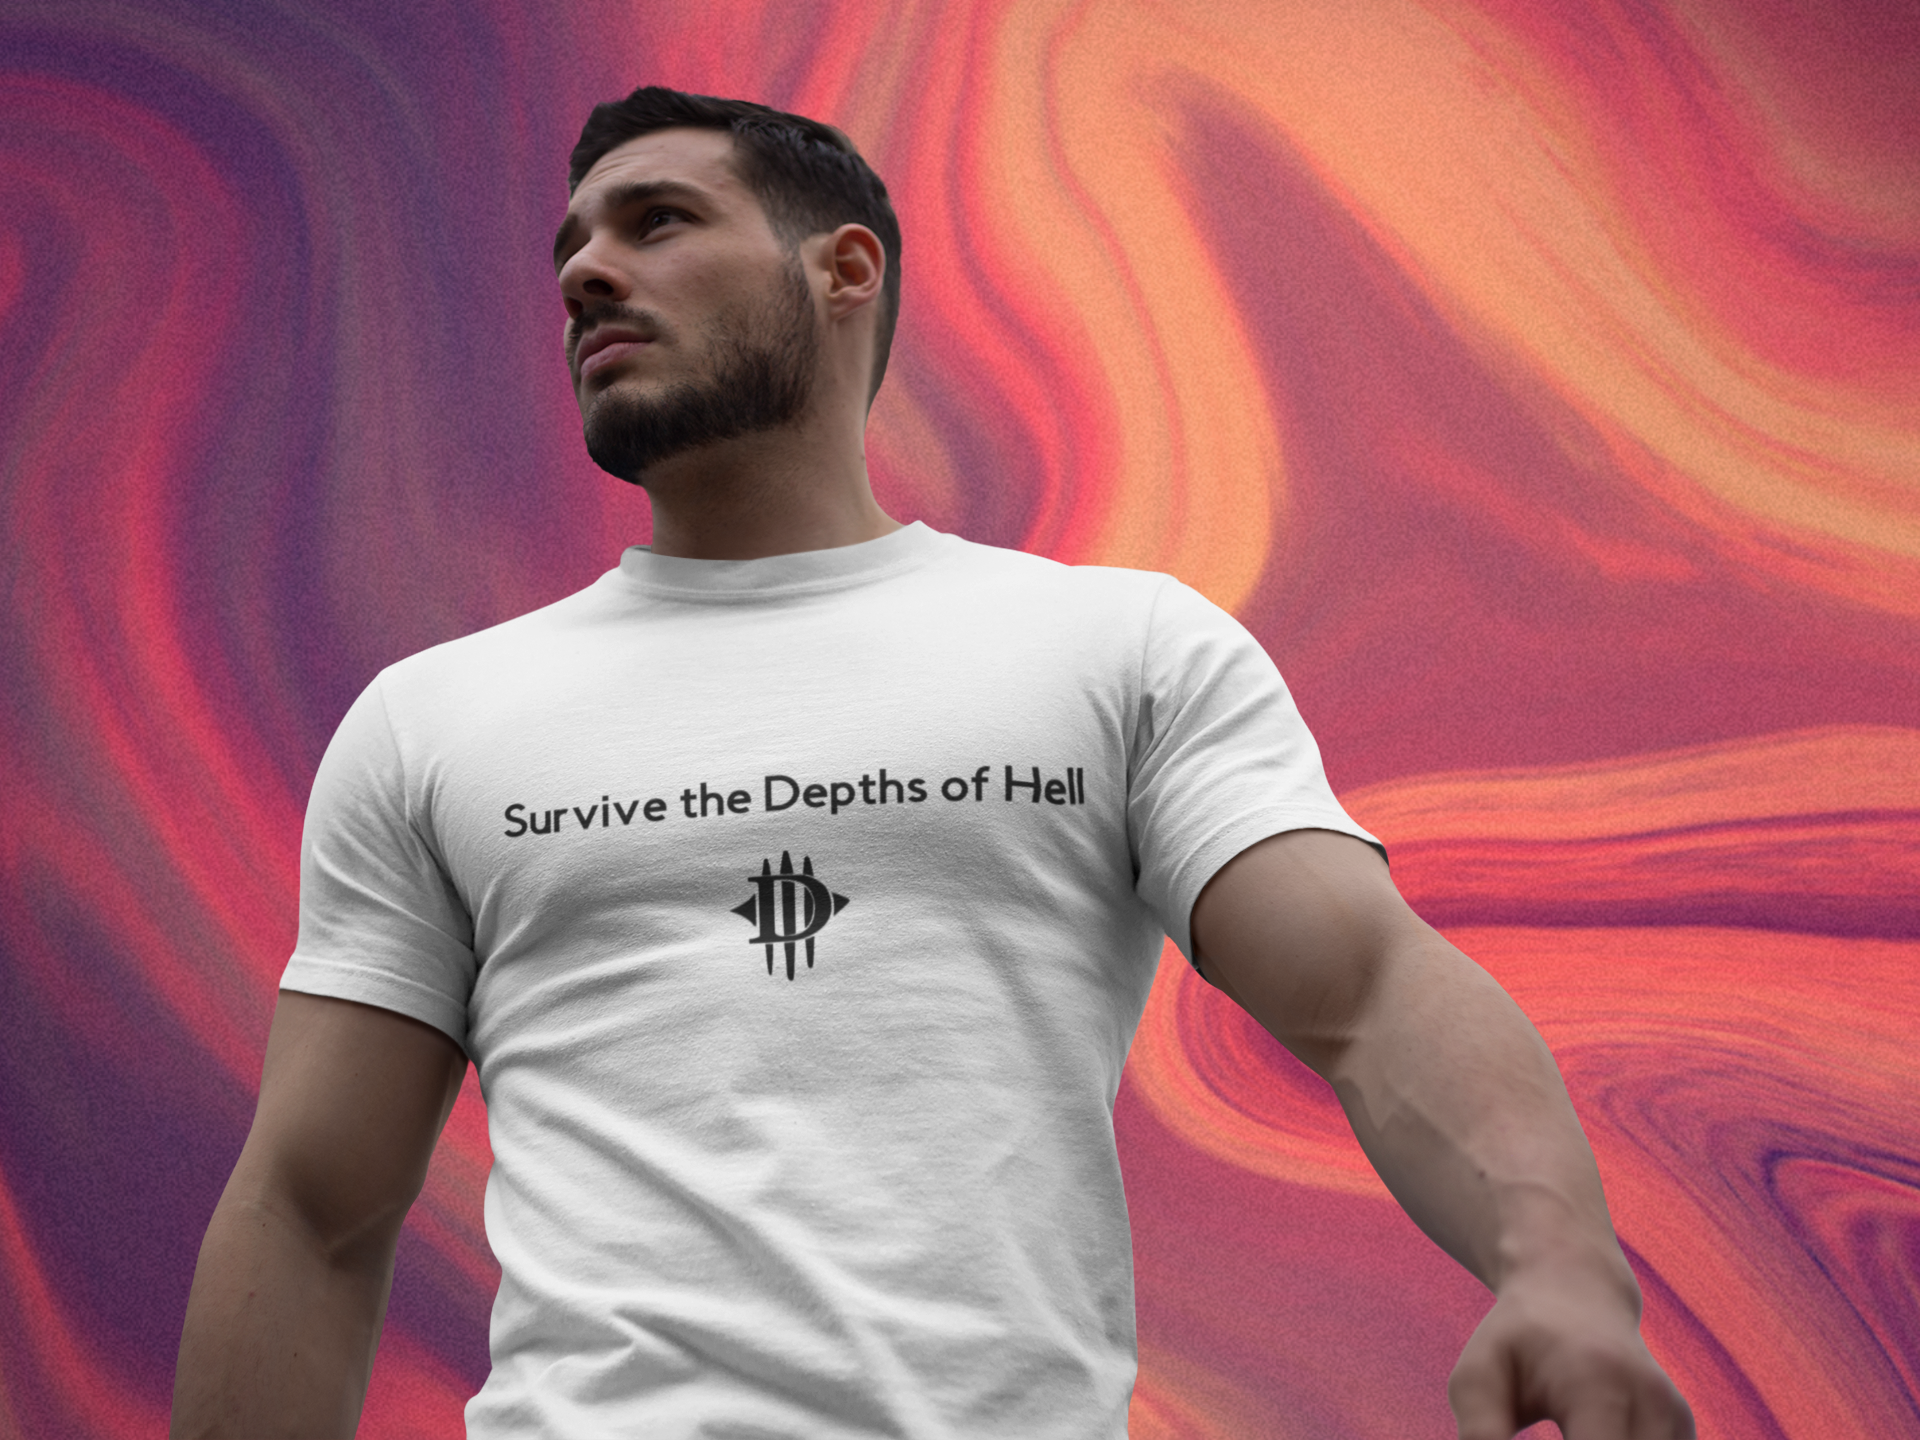 Handsome muscular guy wearing a Survive the Depths of Hell thisrt